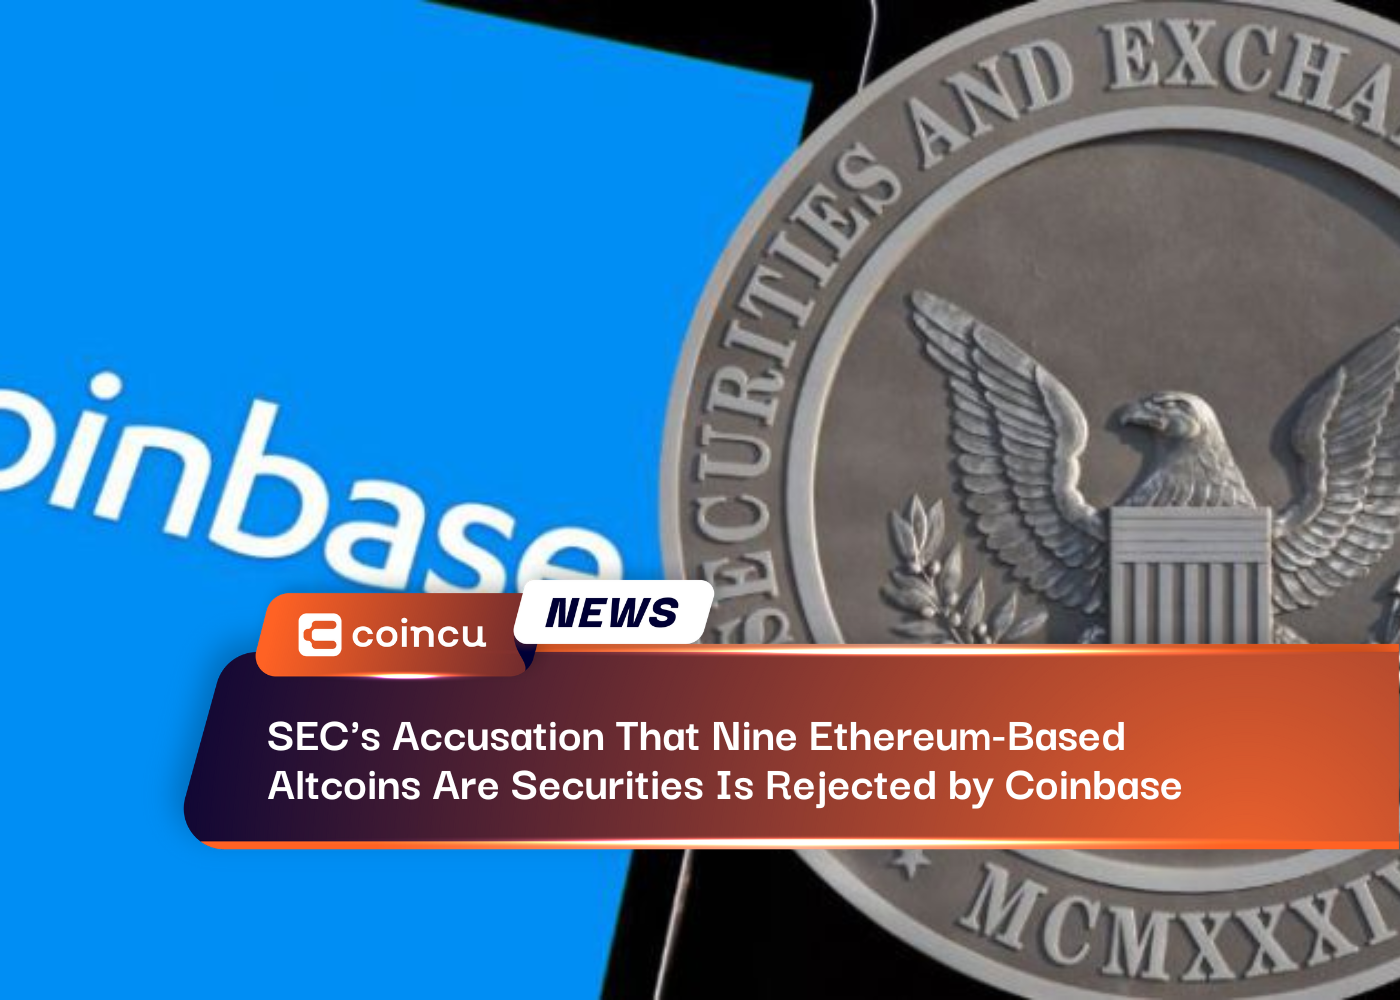 SEC's Accusation That Nine Ethereum-Based Altcoins Are Securities Is Rejected by Coinbase